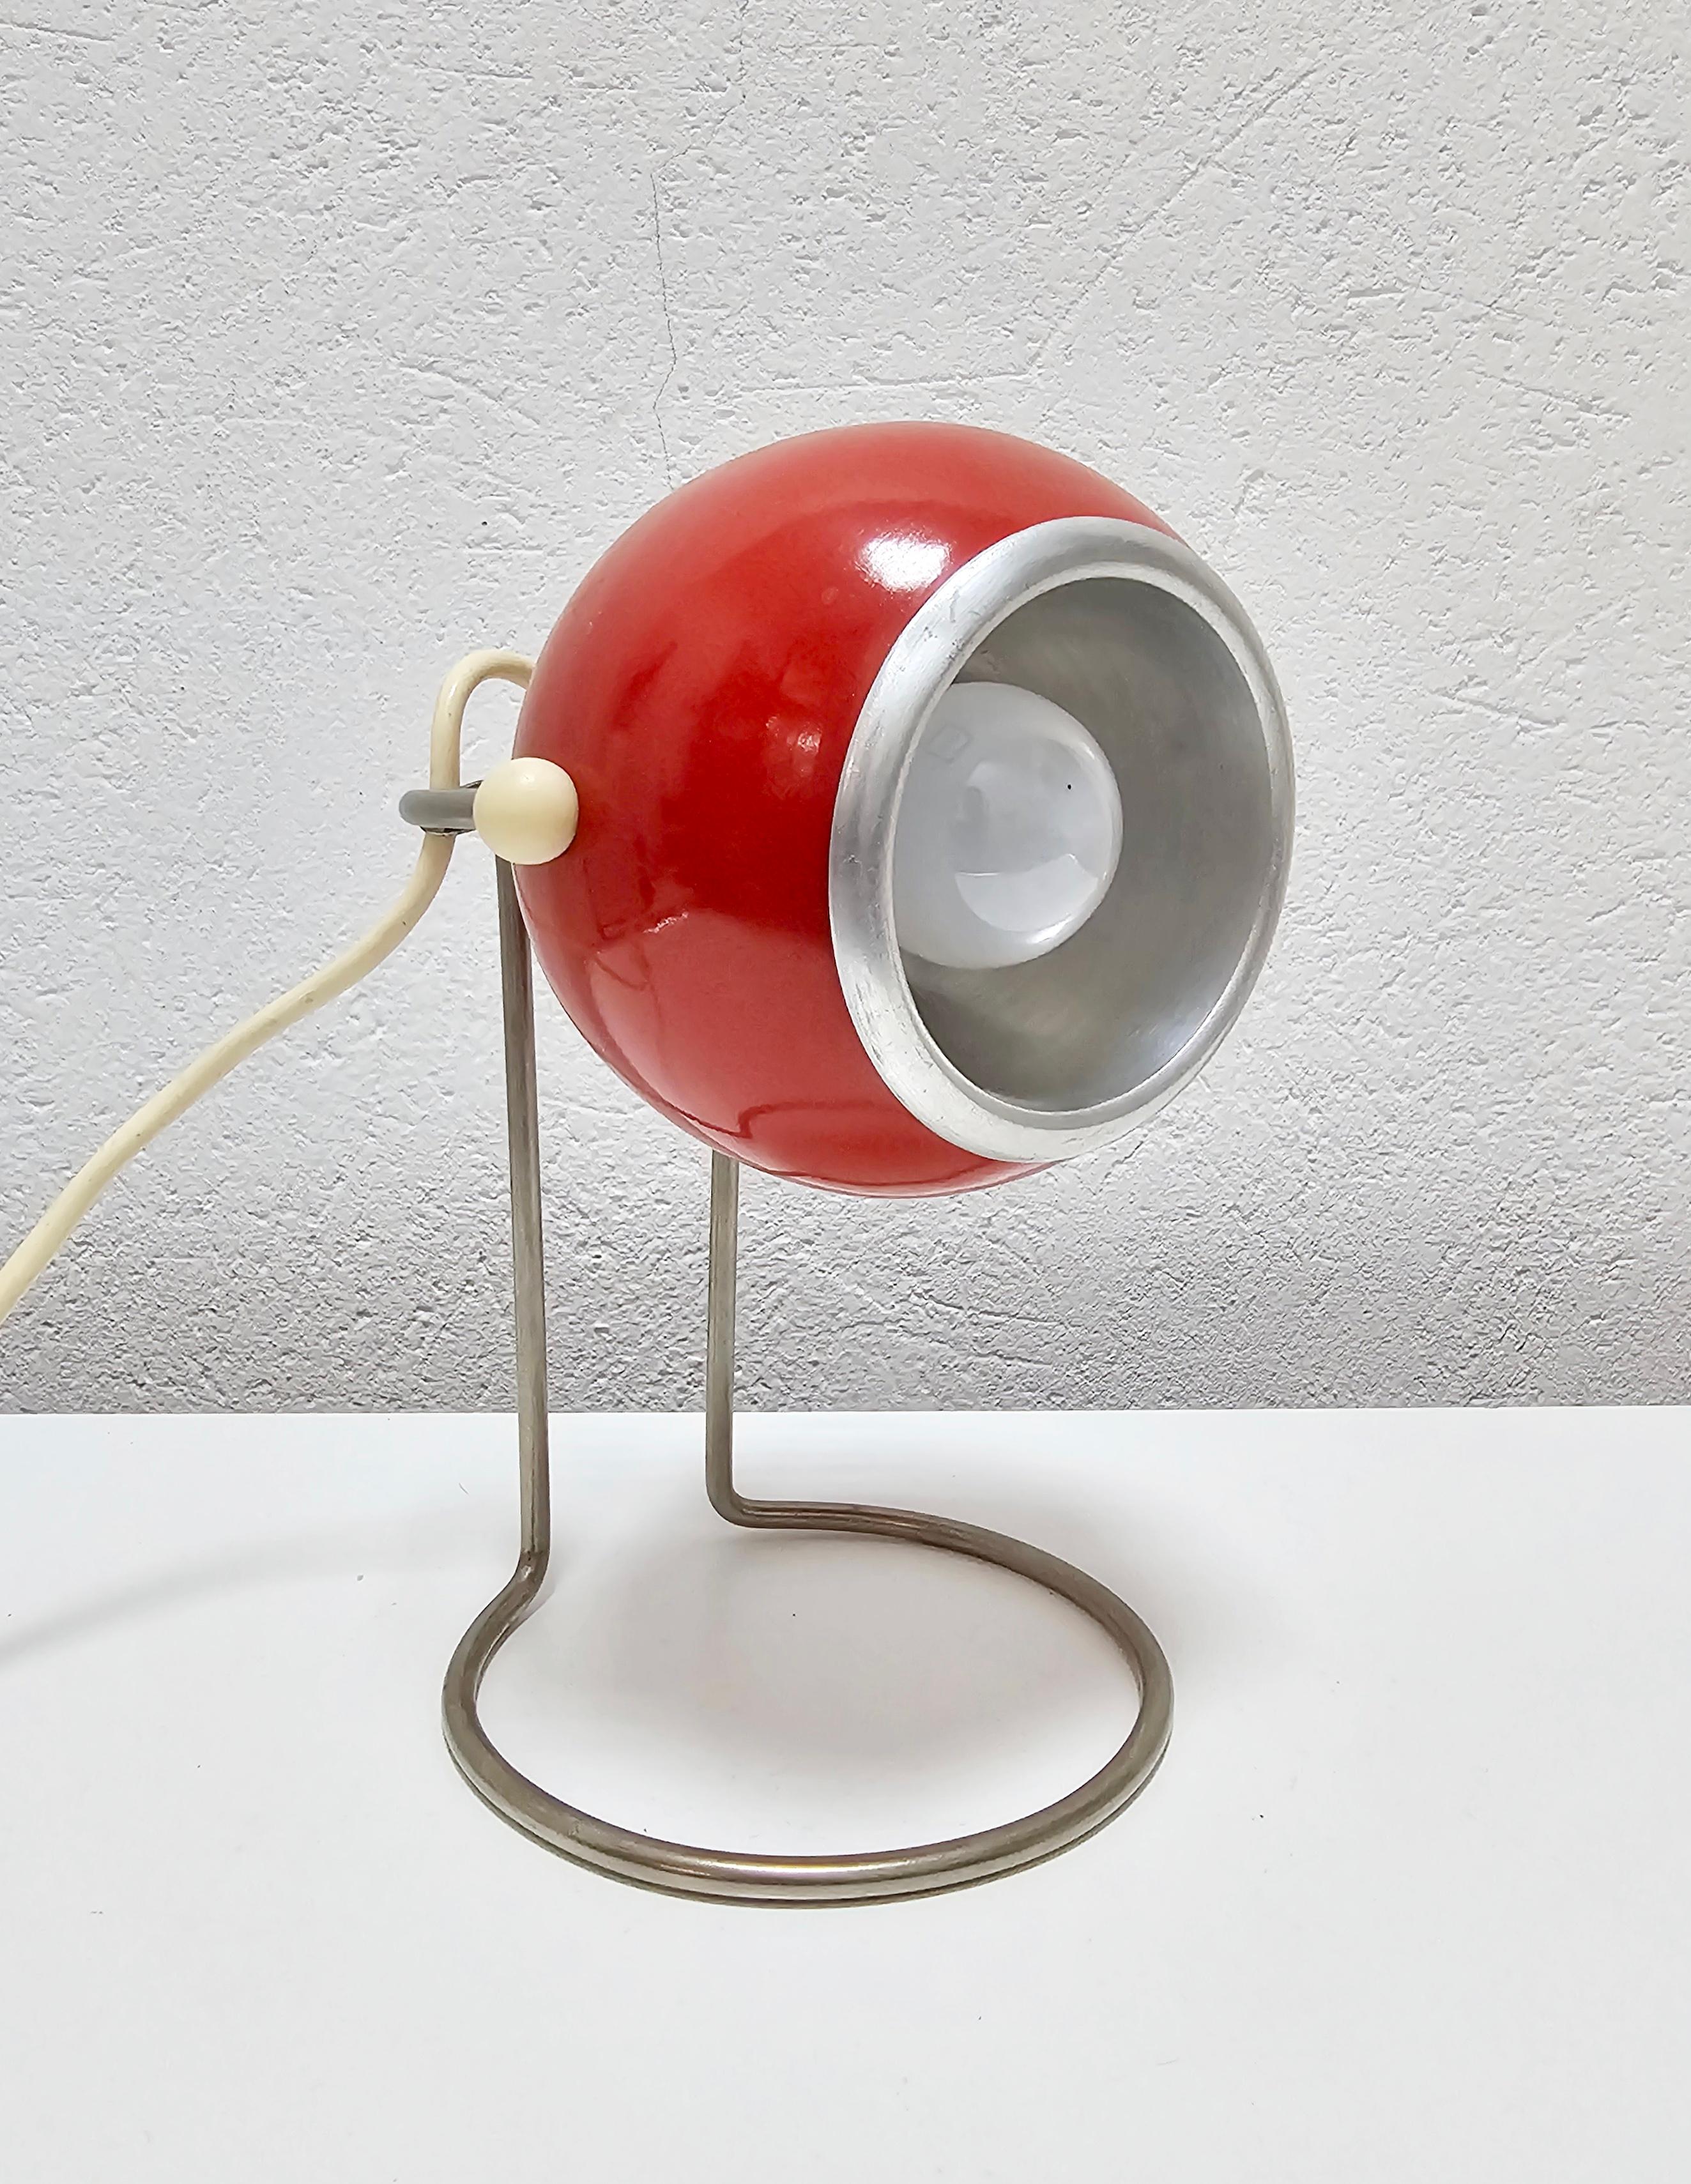 In this listing you will find a striking Space Age table lamp designed by Abo Randers. It features red metal eyeball, which can direct light in different directions, attached to a steel stand. Made in Denmark in 1960s.

Lamp requires a single E14